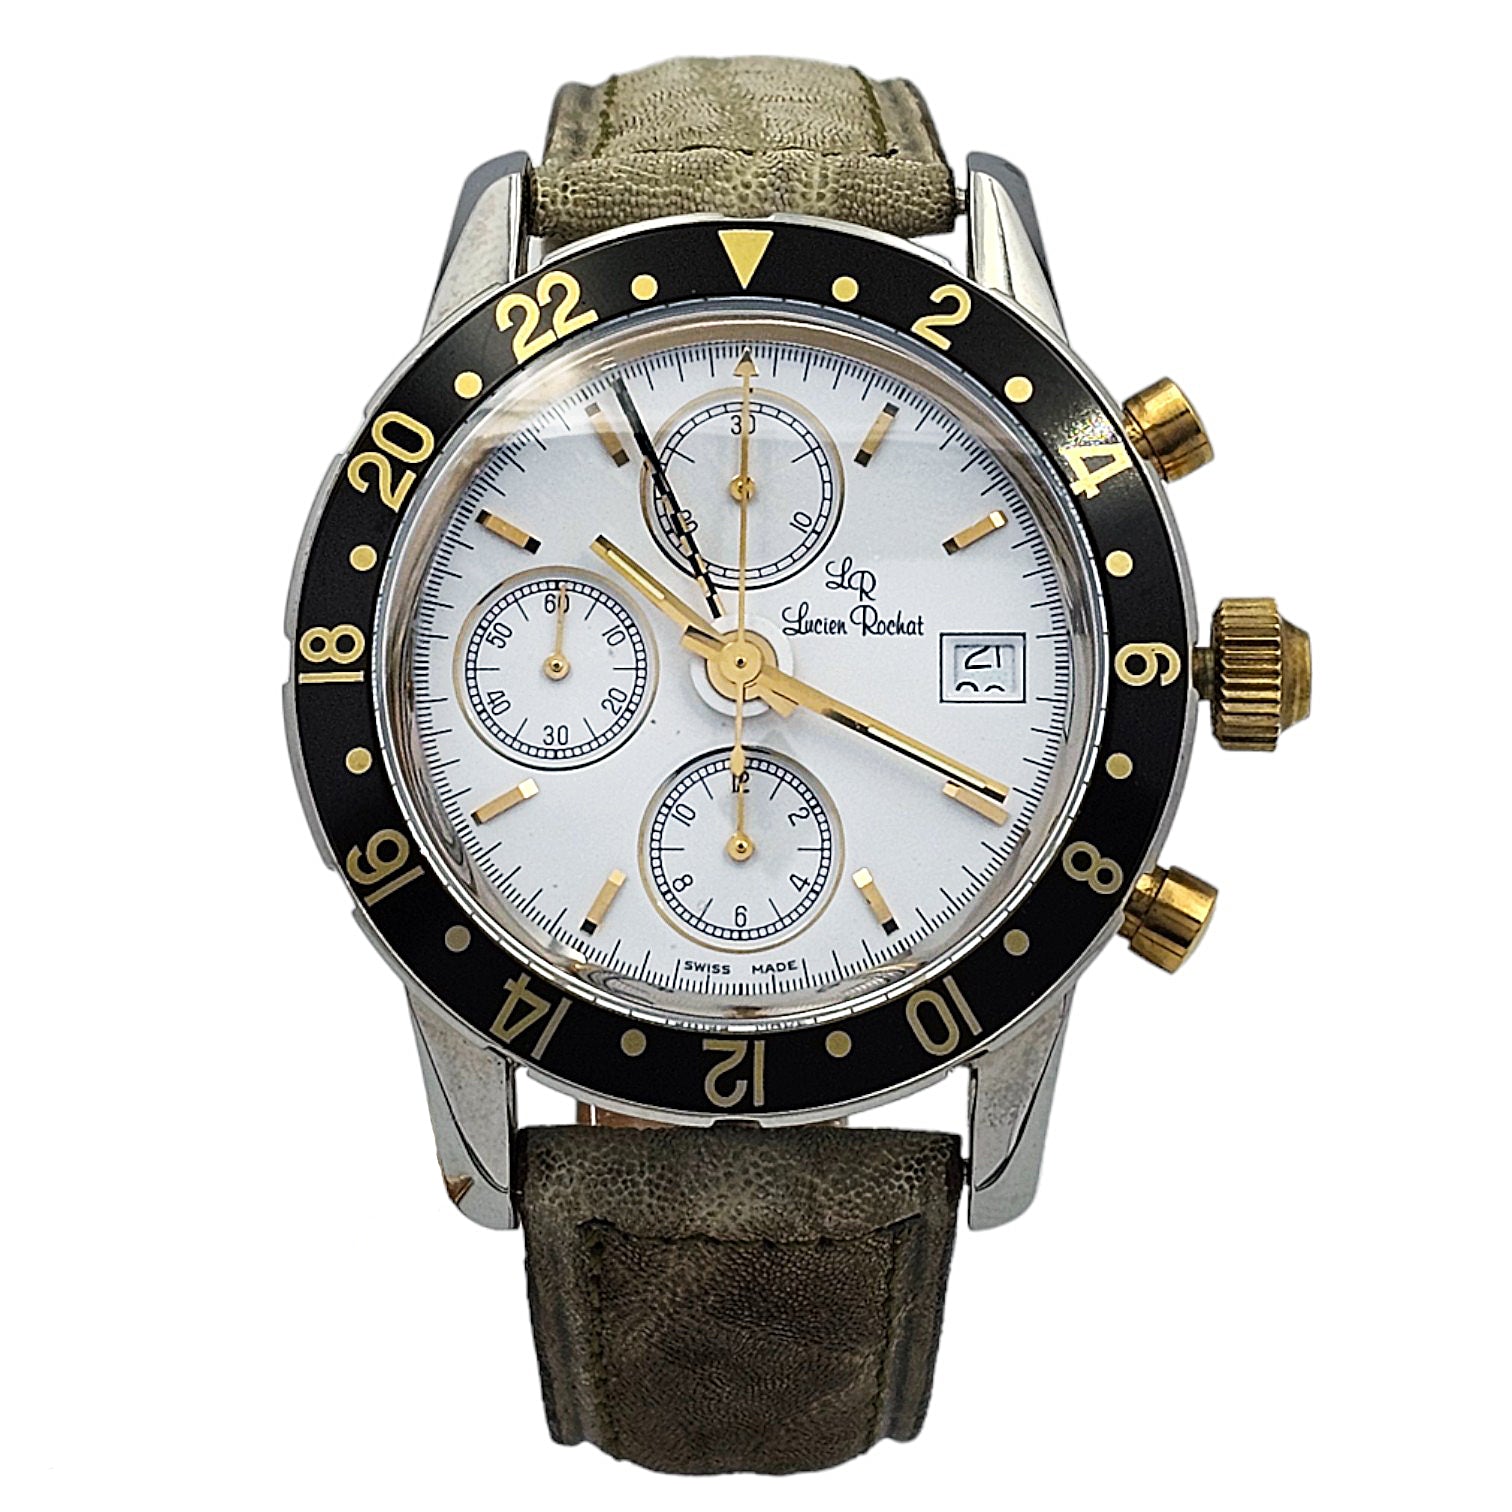 Lucien Rochat Royal Army Gmt Crono Ref. 21.413.037 - ON6338